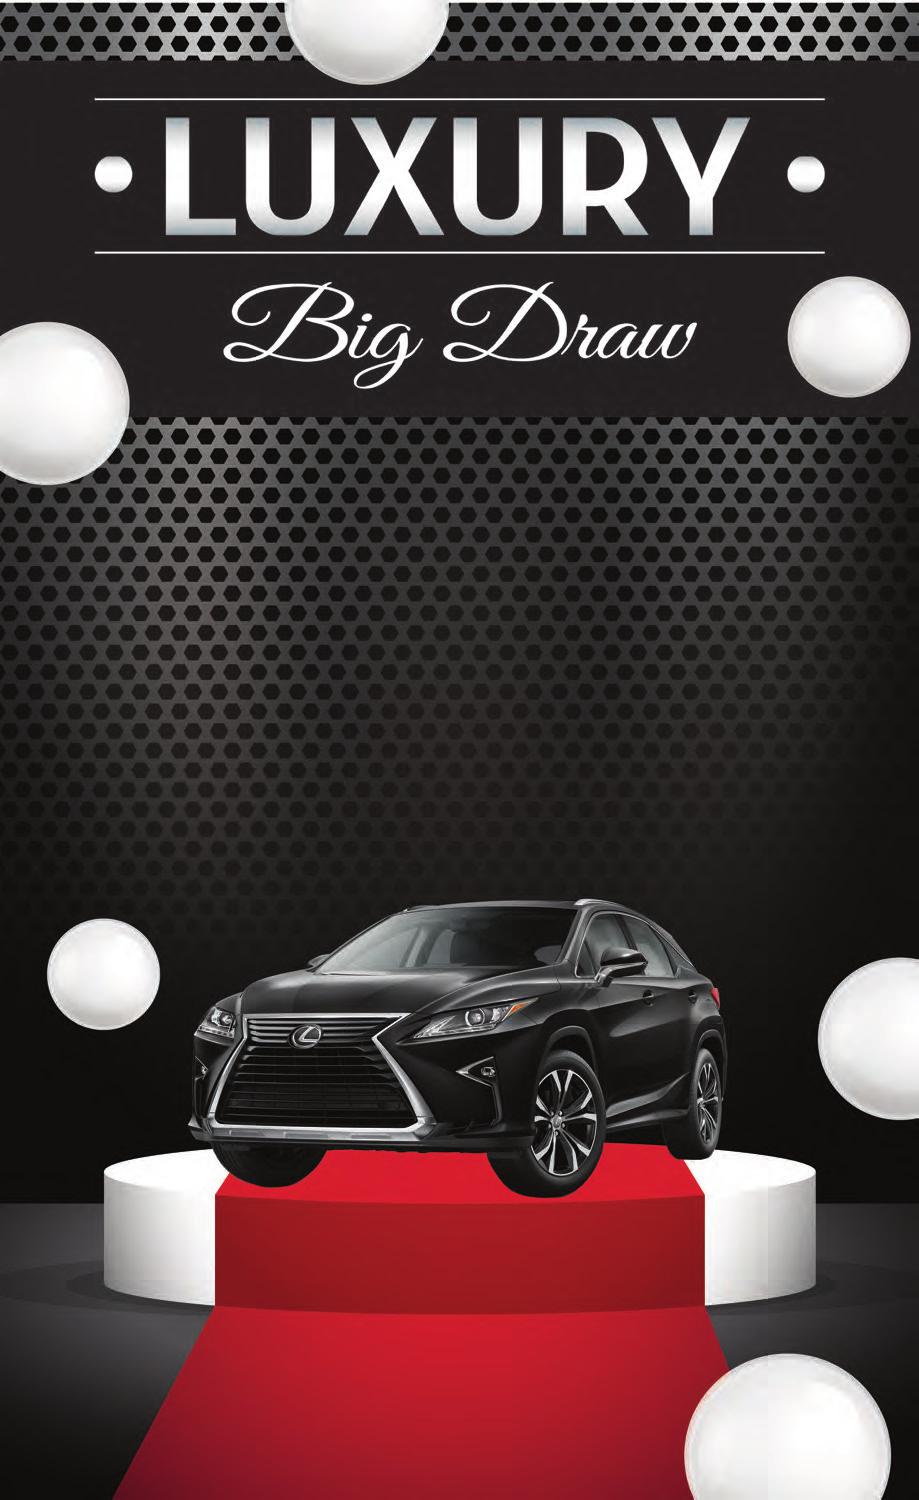 00 46 8 EVERY FRIDAY IN SEPTEMBER 5PM - 9PM DRAWINGS EVERY HOUR Win Free Play, Cash or a Lexus RX 350 just by having the lucky set of numbers At each drawing time a new set of numbers will be drawn.